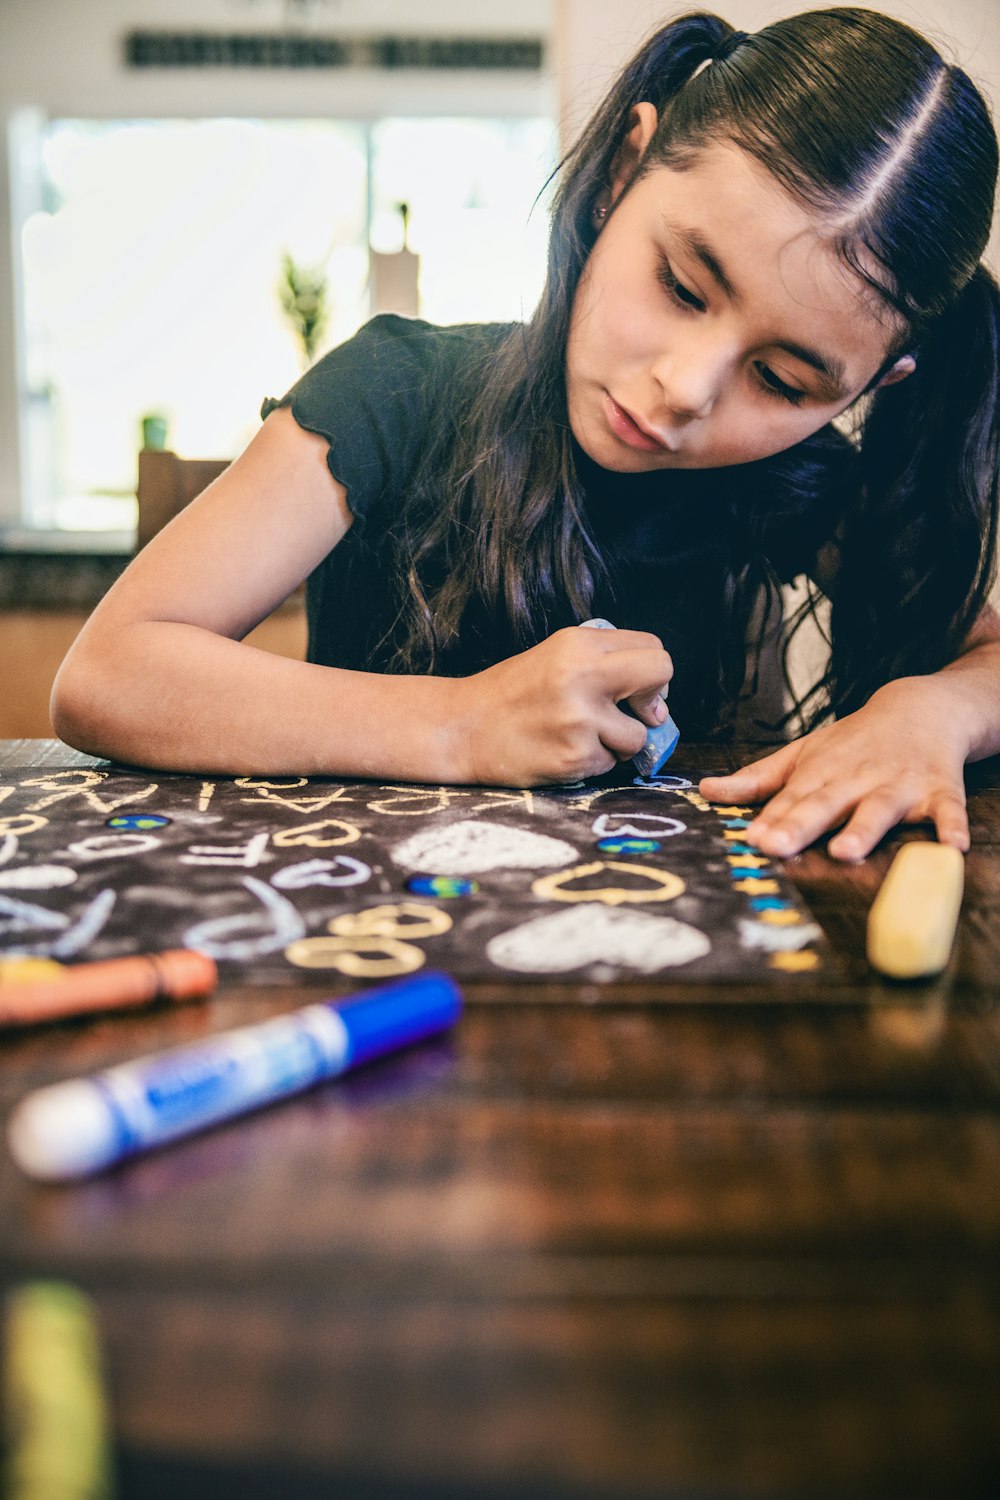 a young girl sitting at a table drawing with crayons